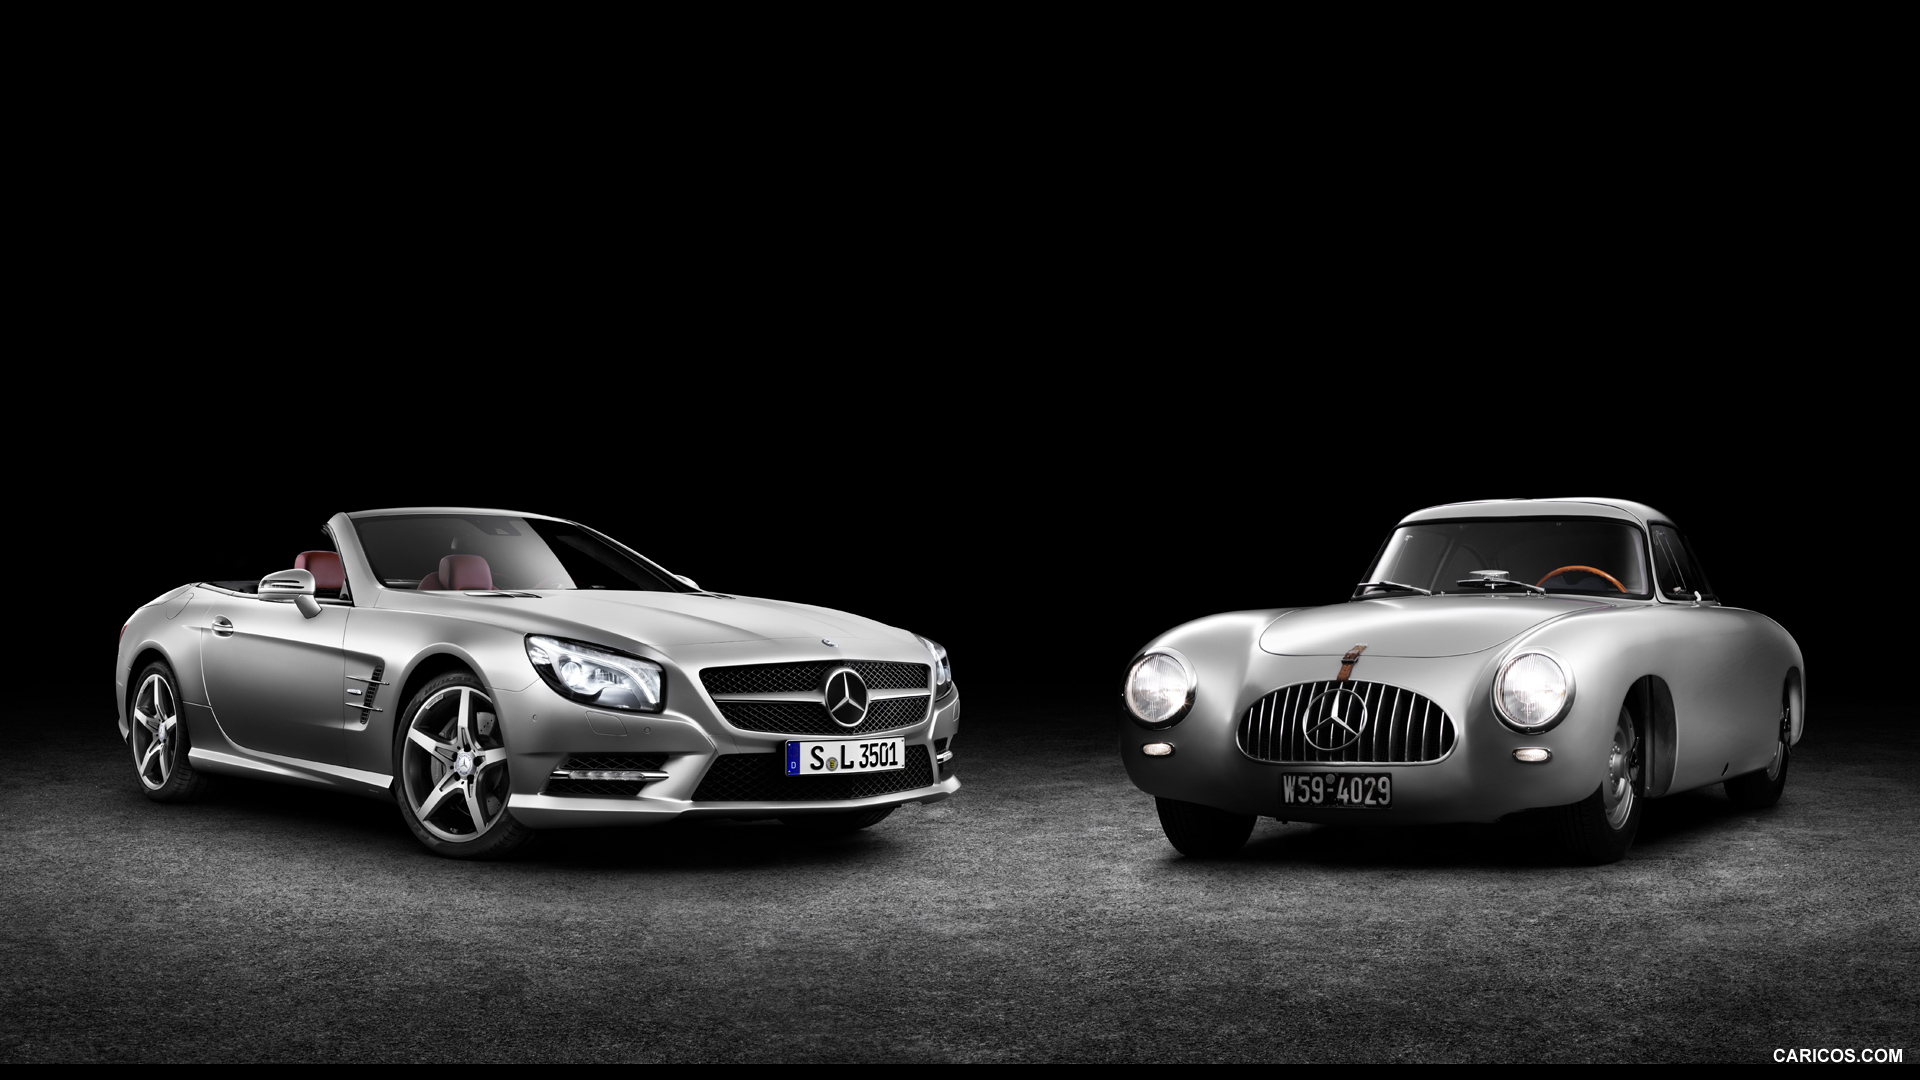 2013 Mercedes-Benz SL-Class and 300 SL W 194 - , #58 of 147